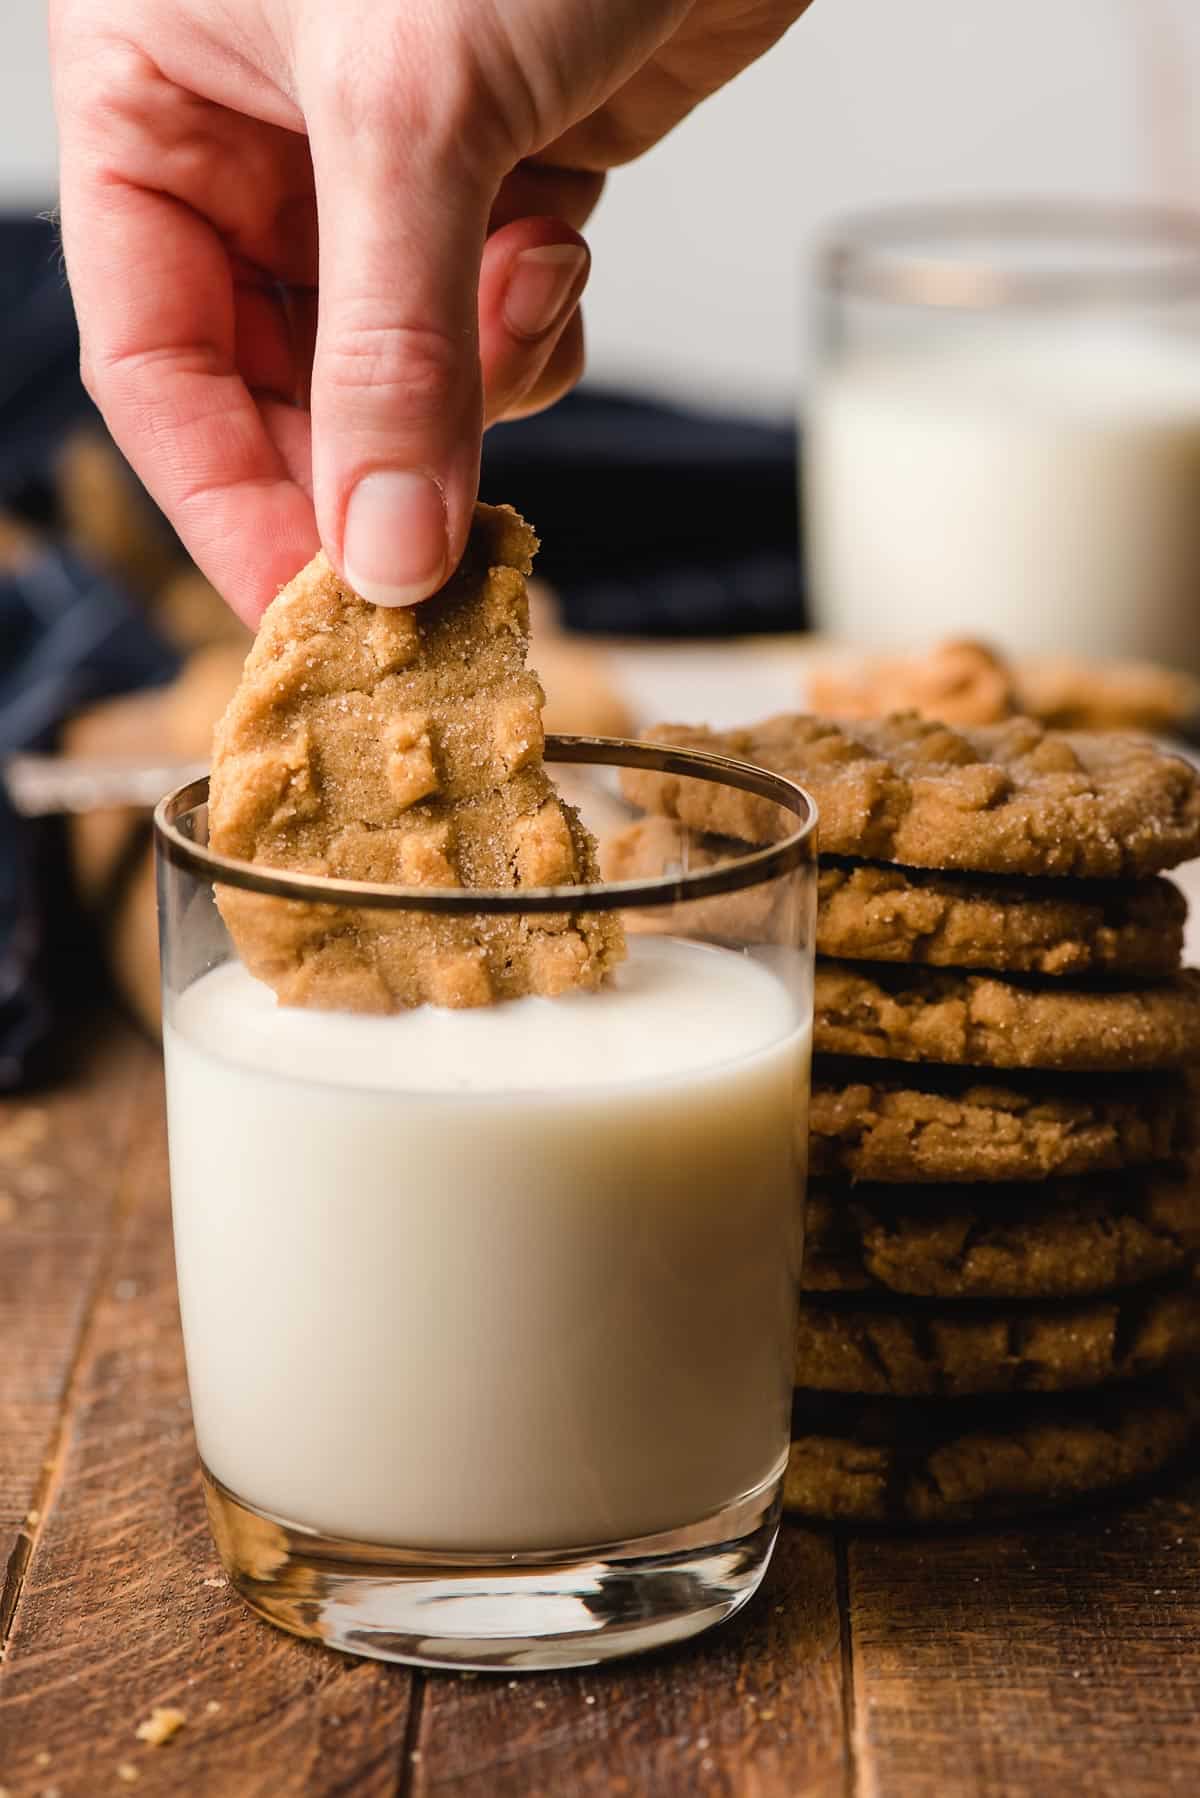 Hand dunking half of a peanut butter cookie into a glass of milk.